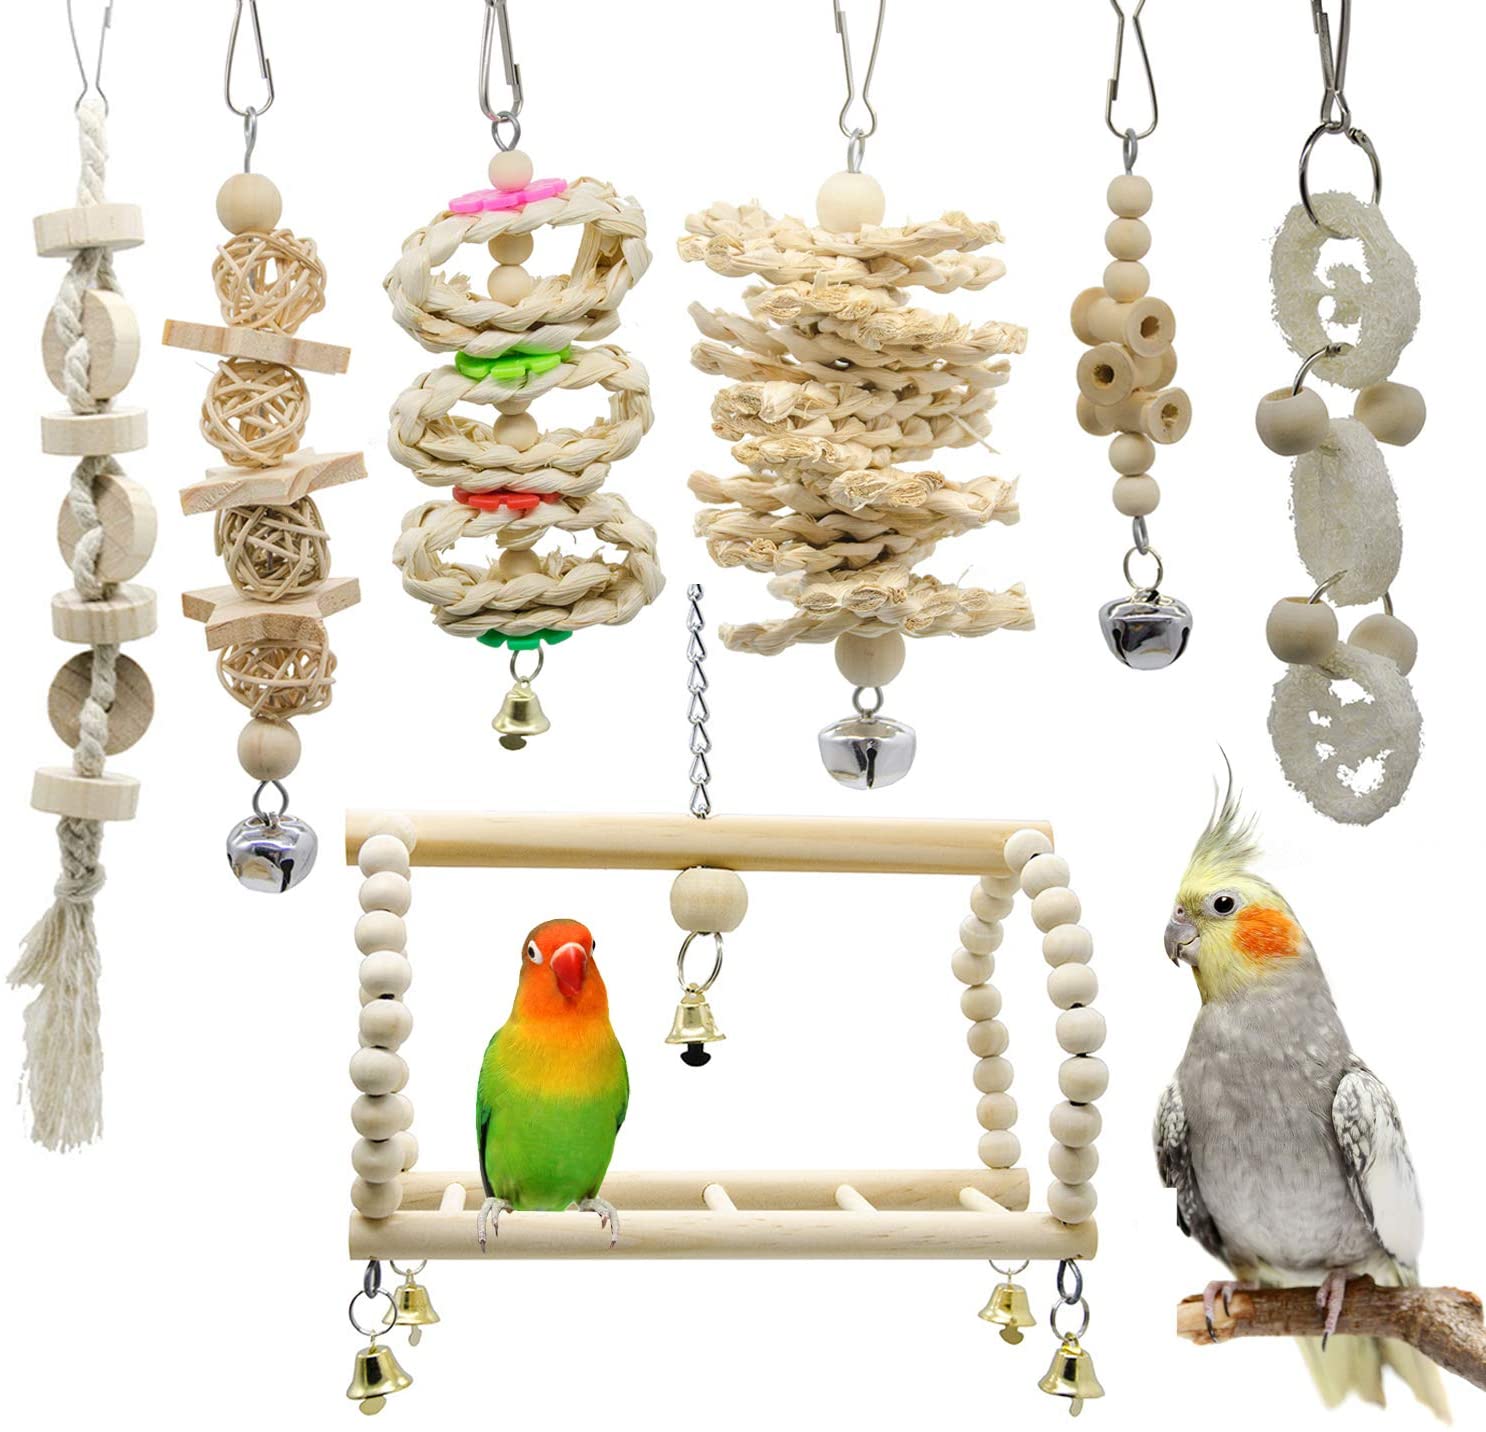 Deloky 7 Packs Bird Parrot Swing Chewing Toys and gifts for pets